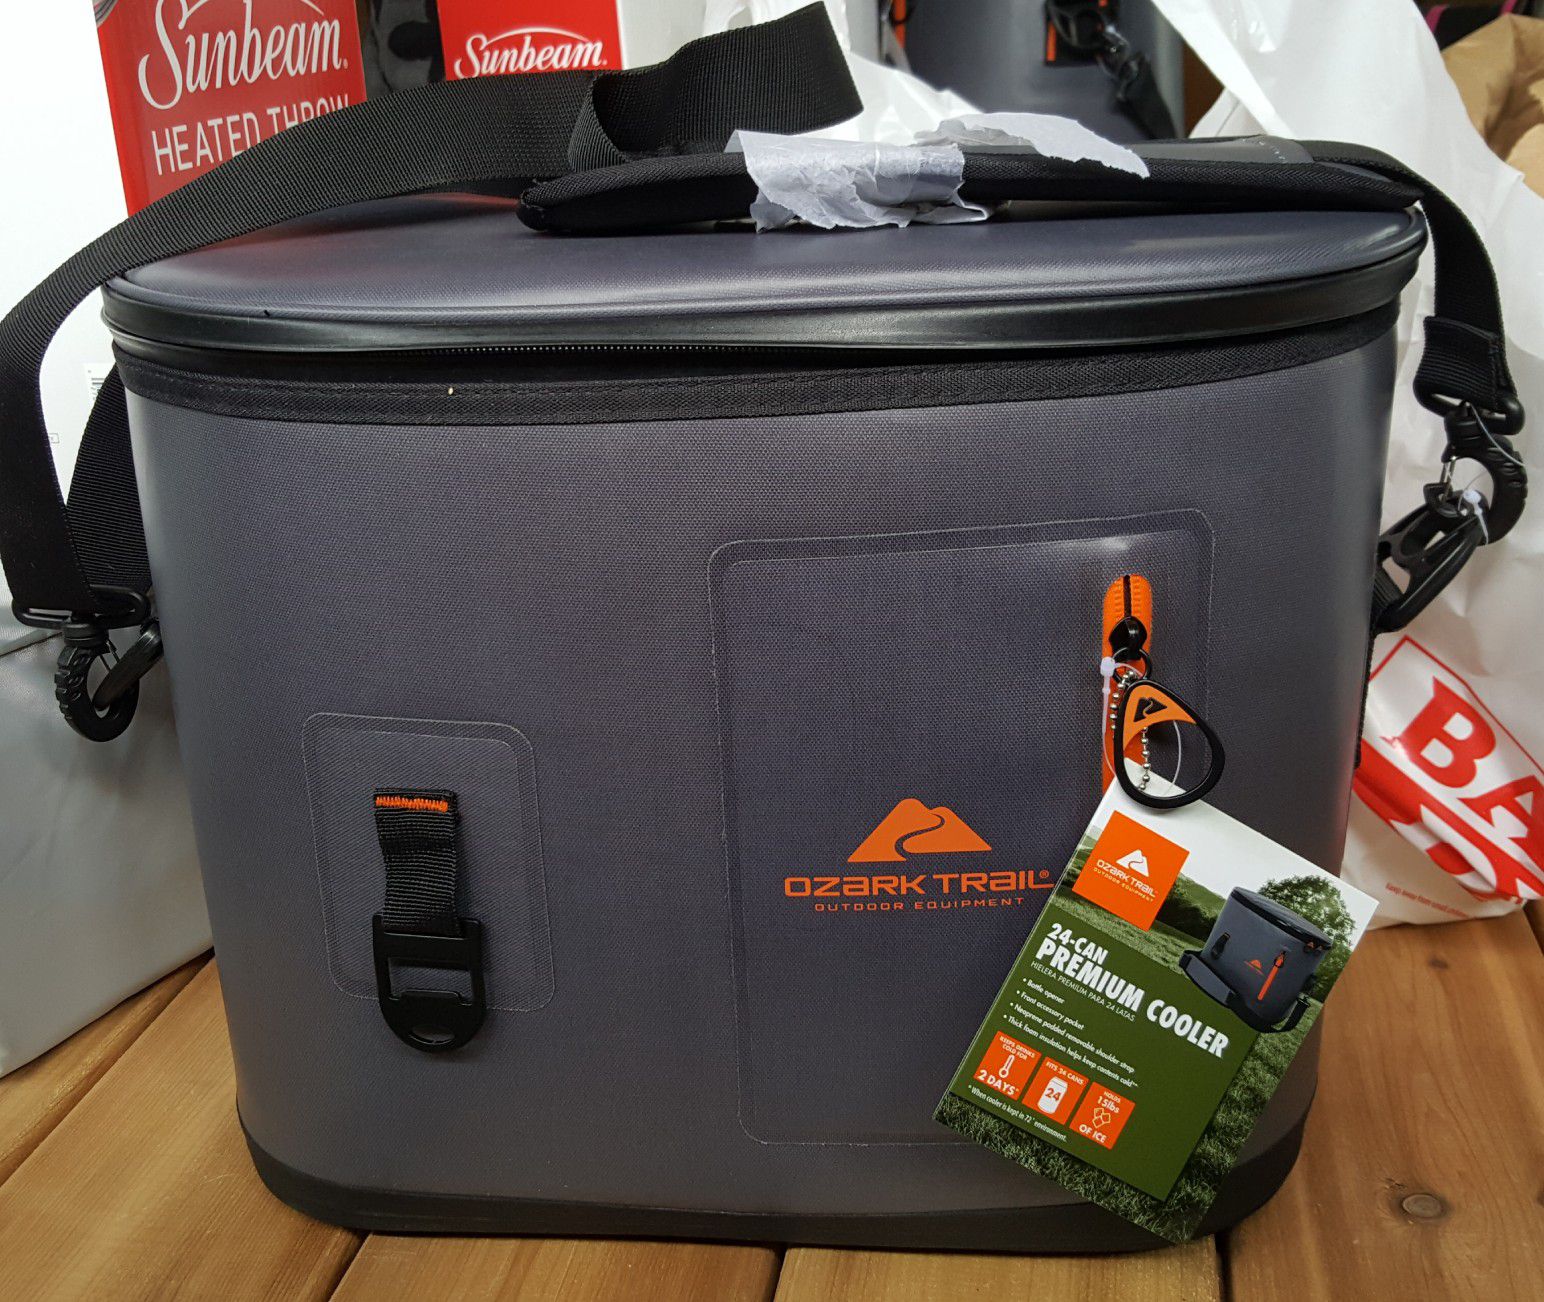 OZARK TRAIL 24 CAN COOLER for Sale in Marysville, WA - OfferUp